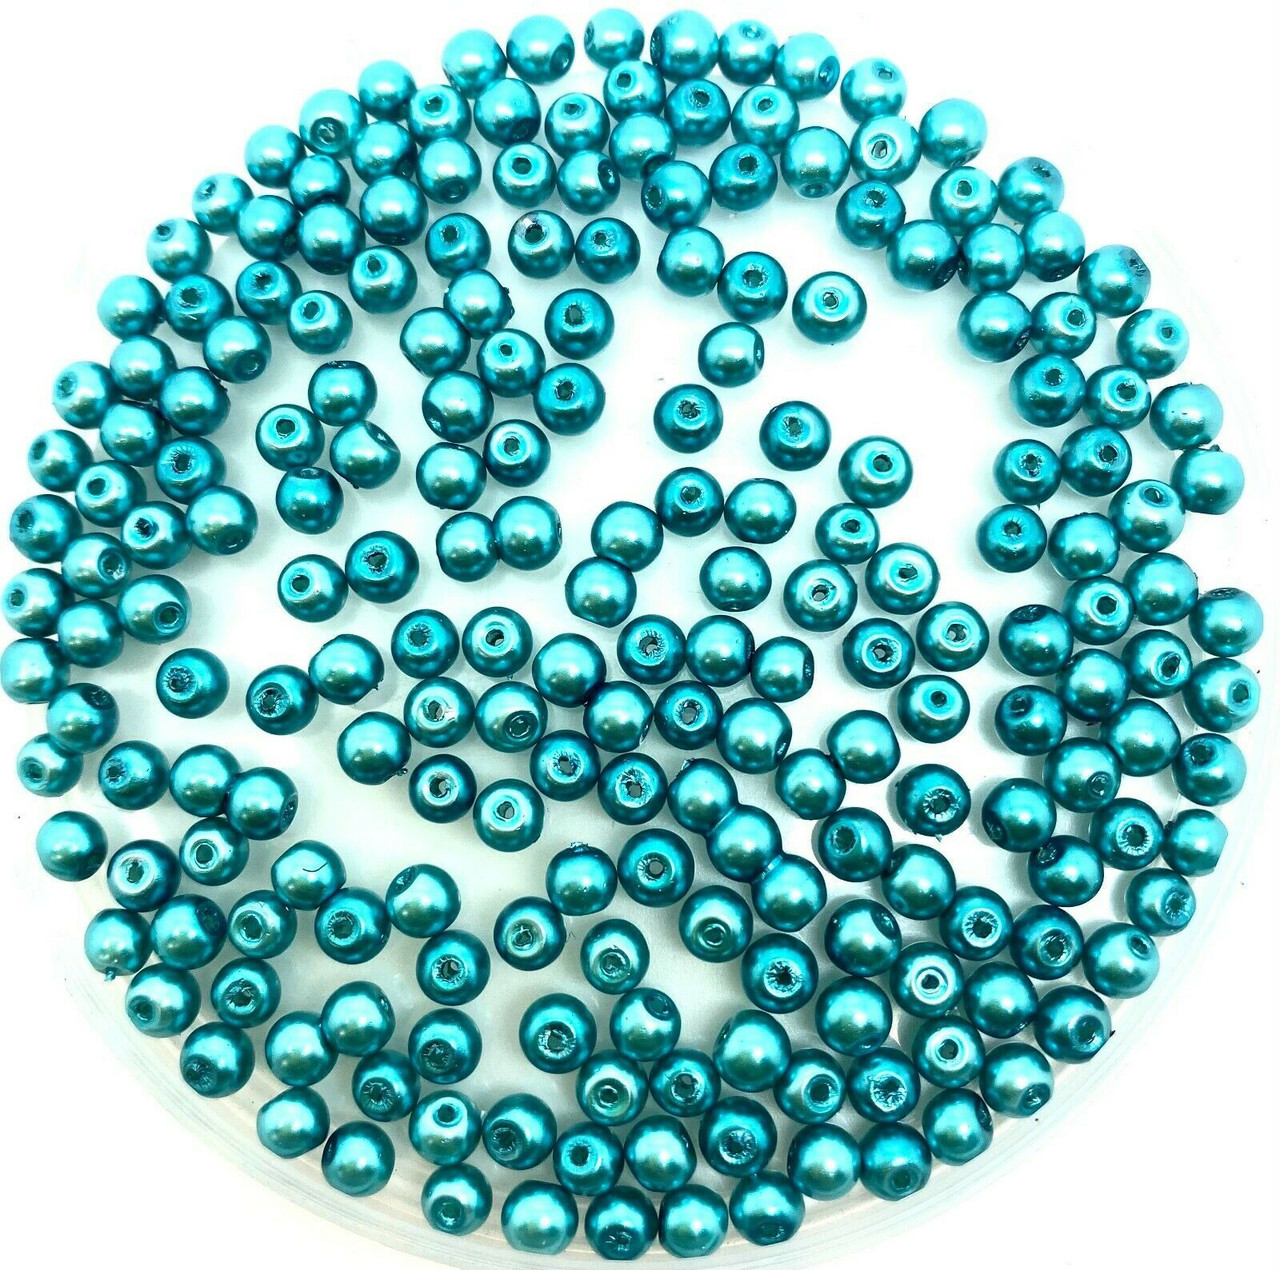 Teal 4mm Glass Pearls